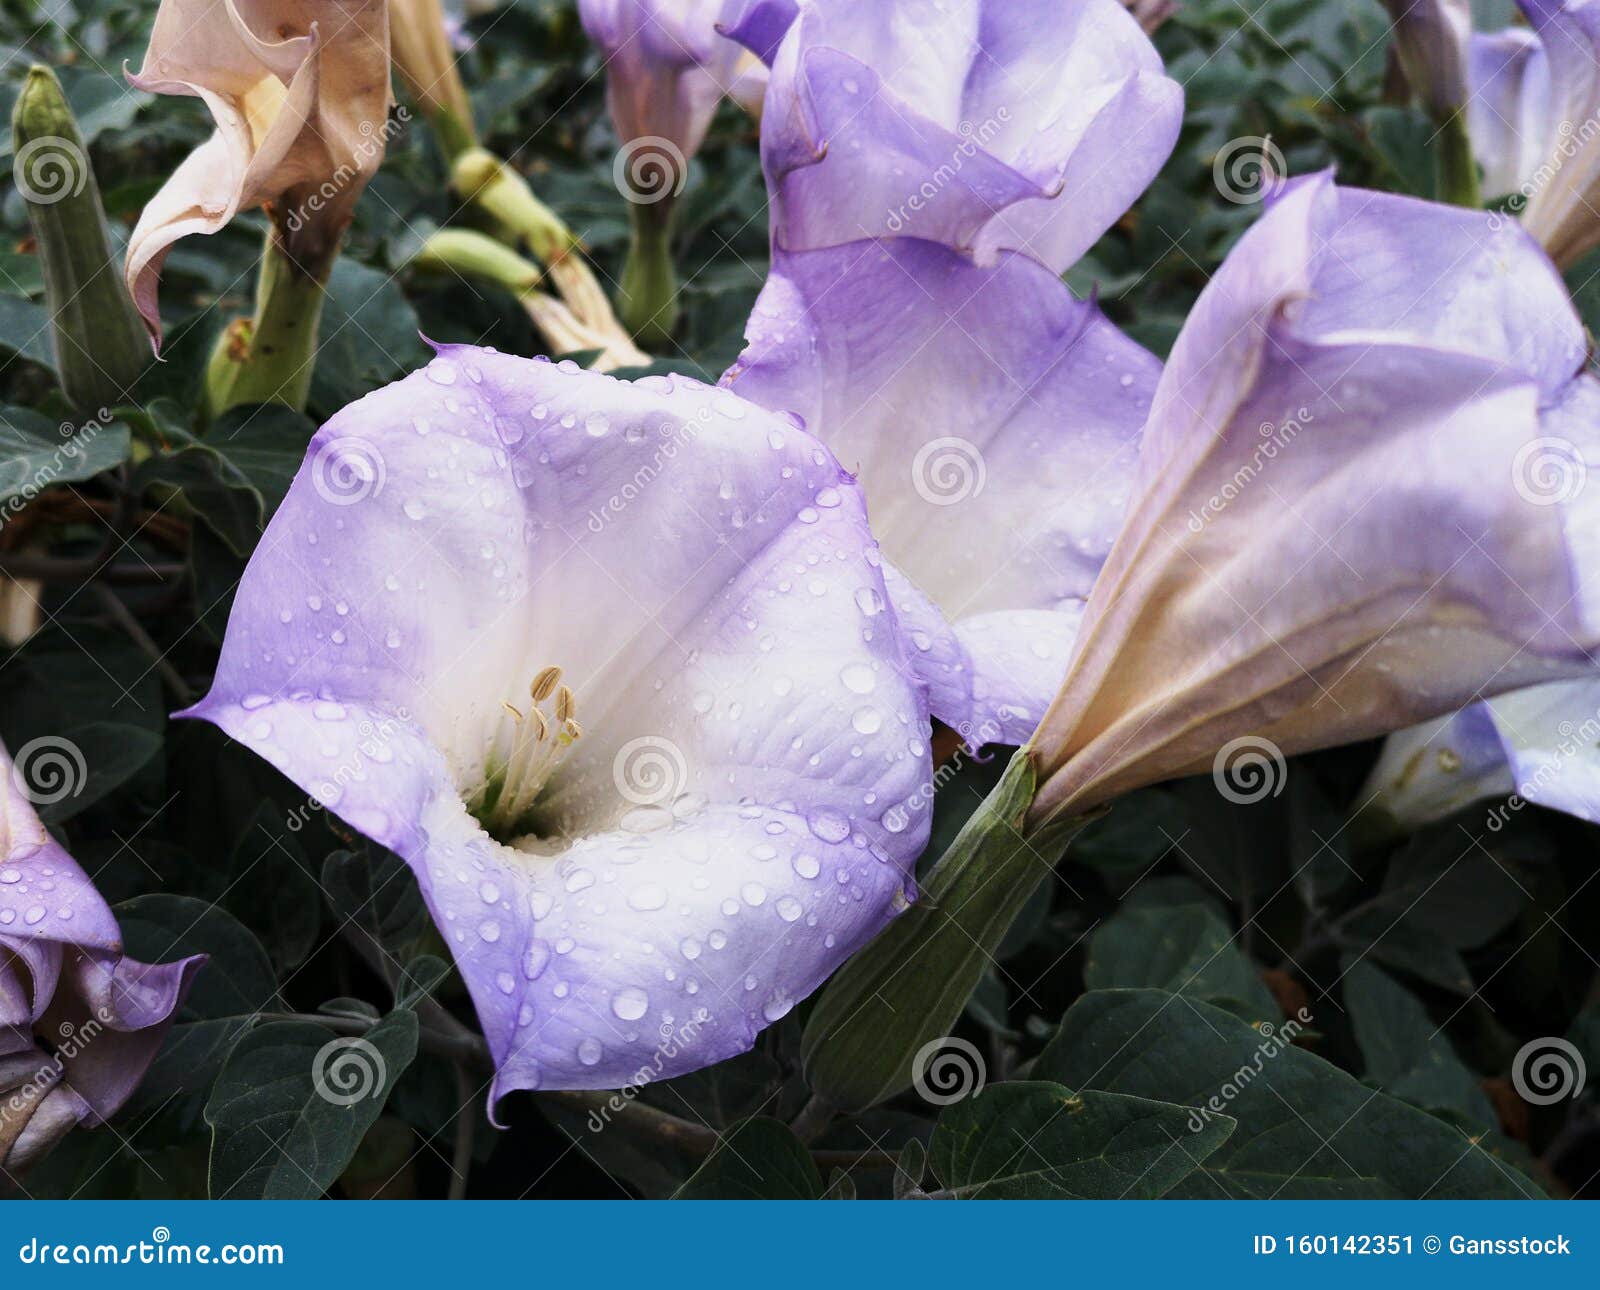 181 Purple Datura Photos - Free & Royalty-Free Stock Photos from Dreamstime